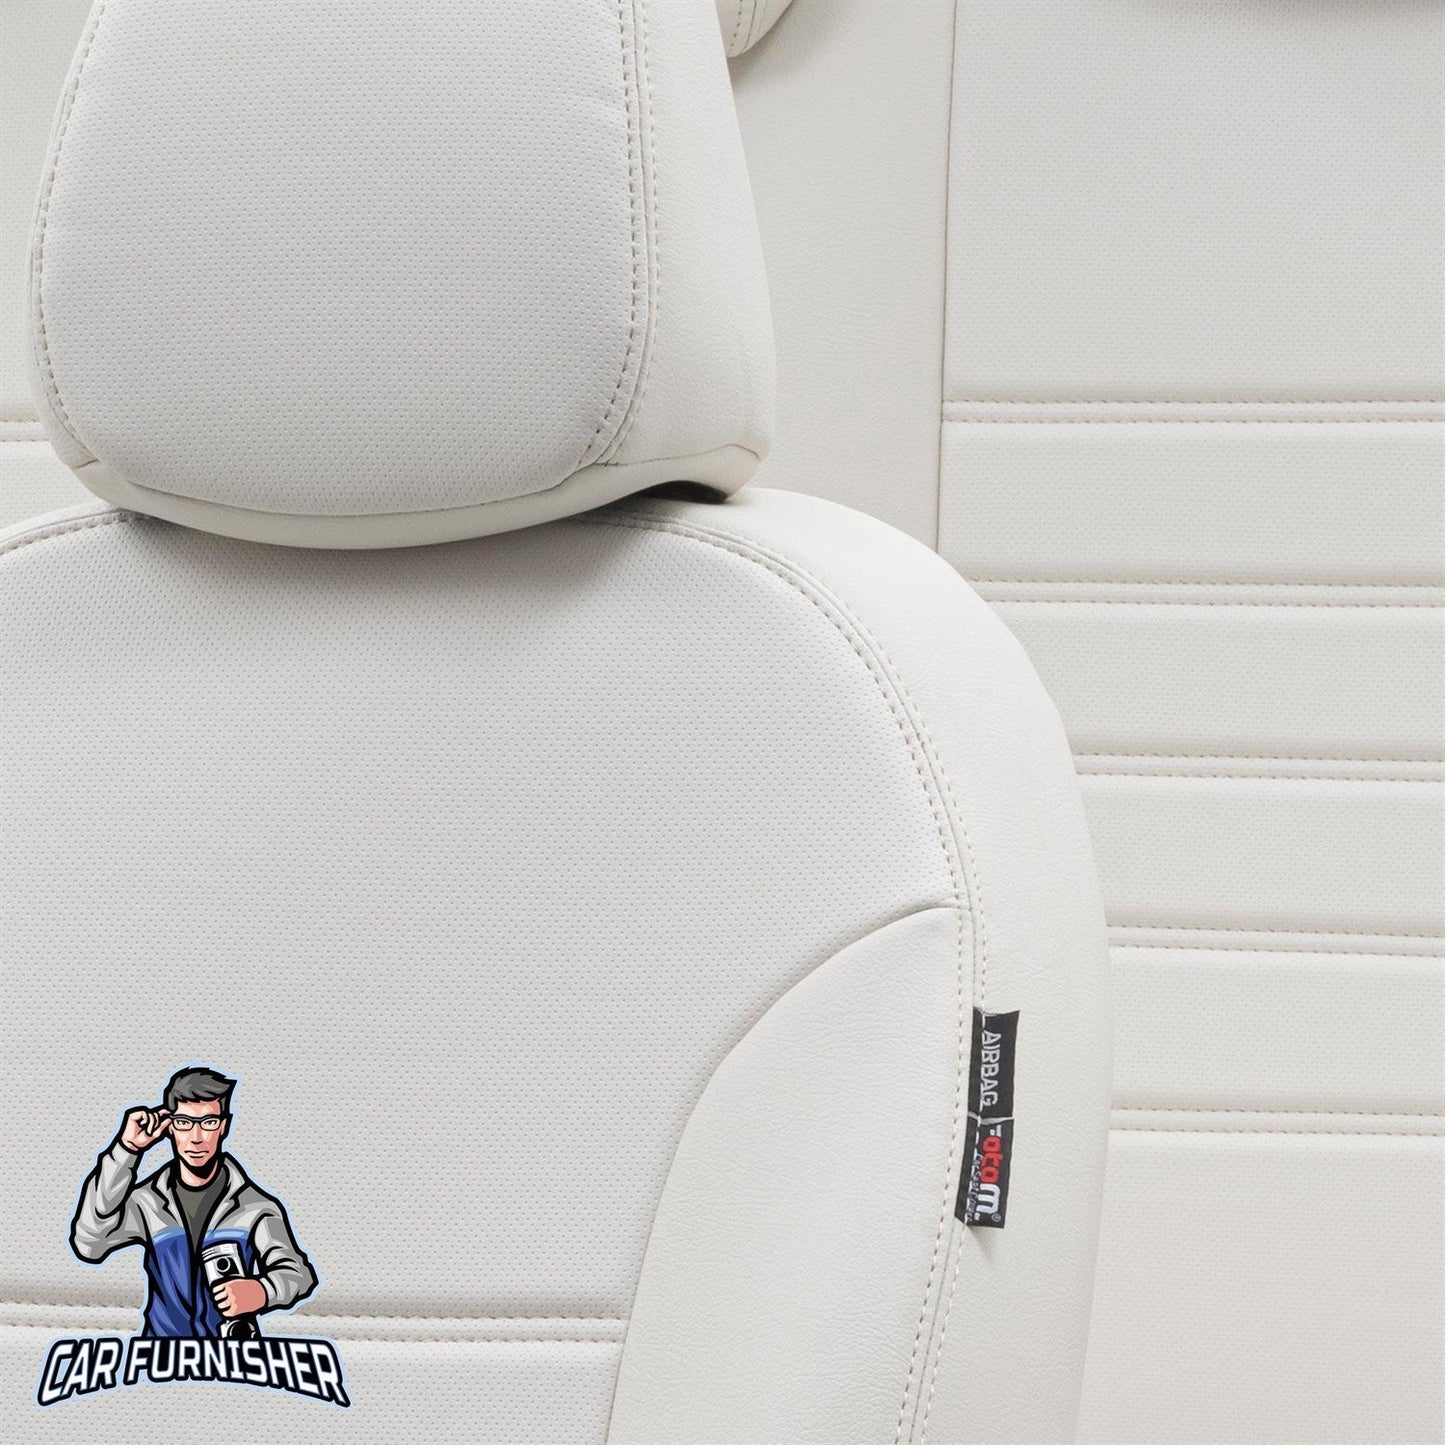 Fiat Doblo Seat Covers Istanbul Leather Design Ivory Leather